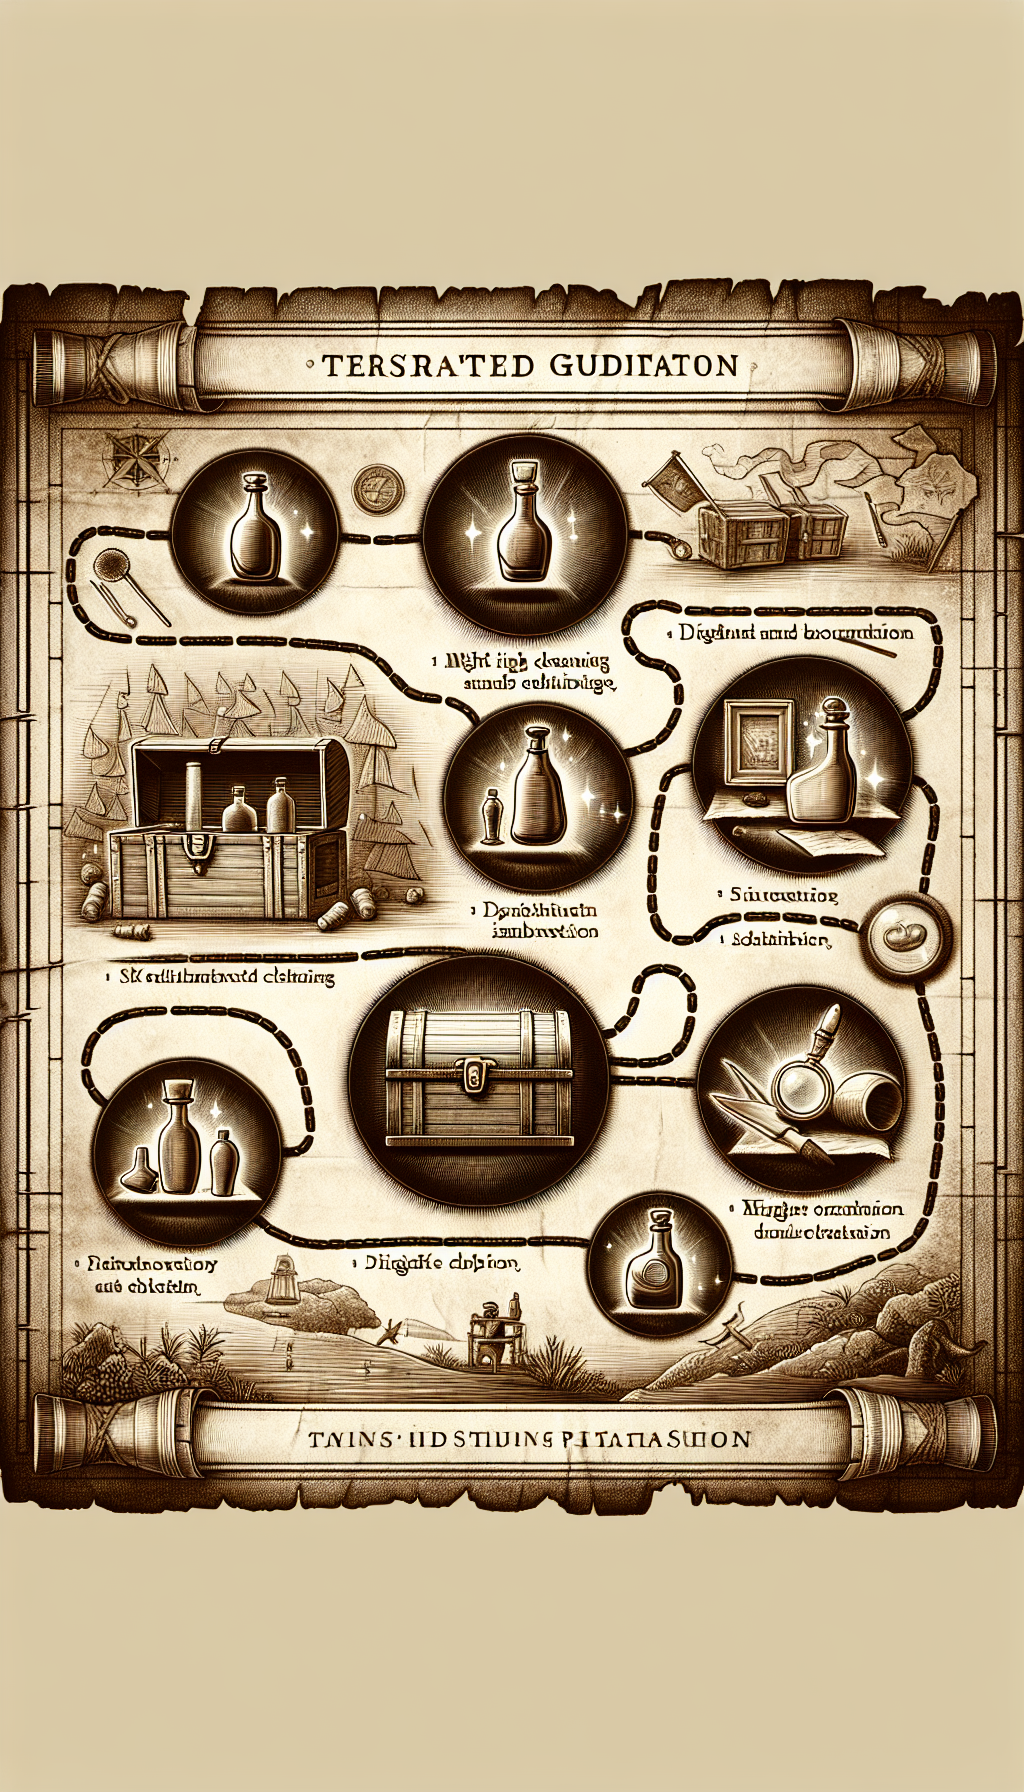 An illustrated sepia-toned treasure map unfurls across the image, the path marked by various stylized antique bottles, culminating in a gleaming chest labeled “Value.” Integrated along the path are small vignettes depicting maintenance tips like gentle cleaning, proper display, and documentation, symbolized by tiny brushes, protective cases, and magnifying glasses examining the bottles’ unique characteristics.